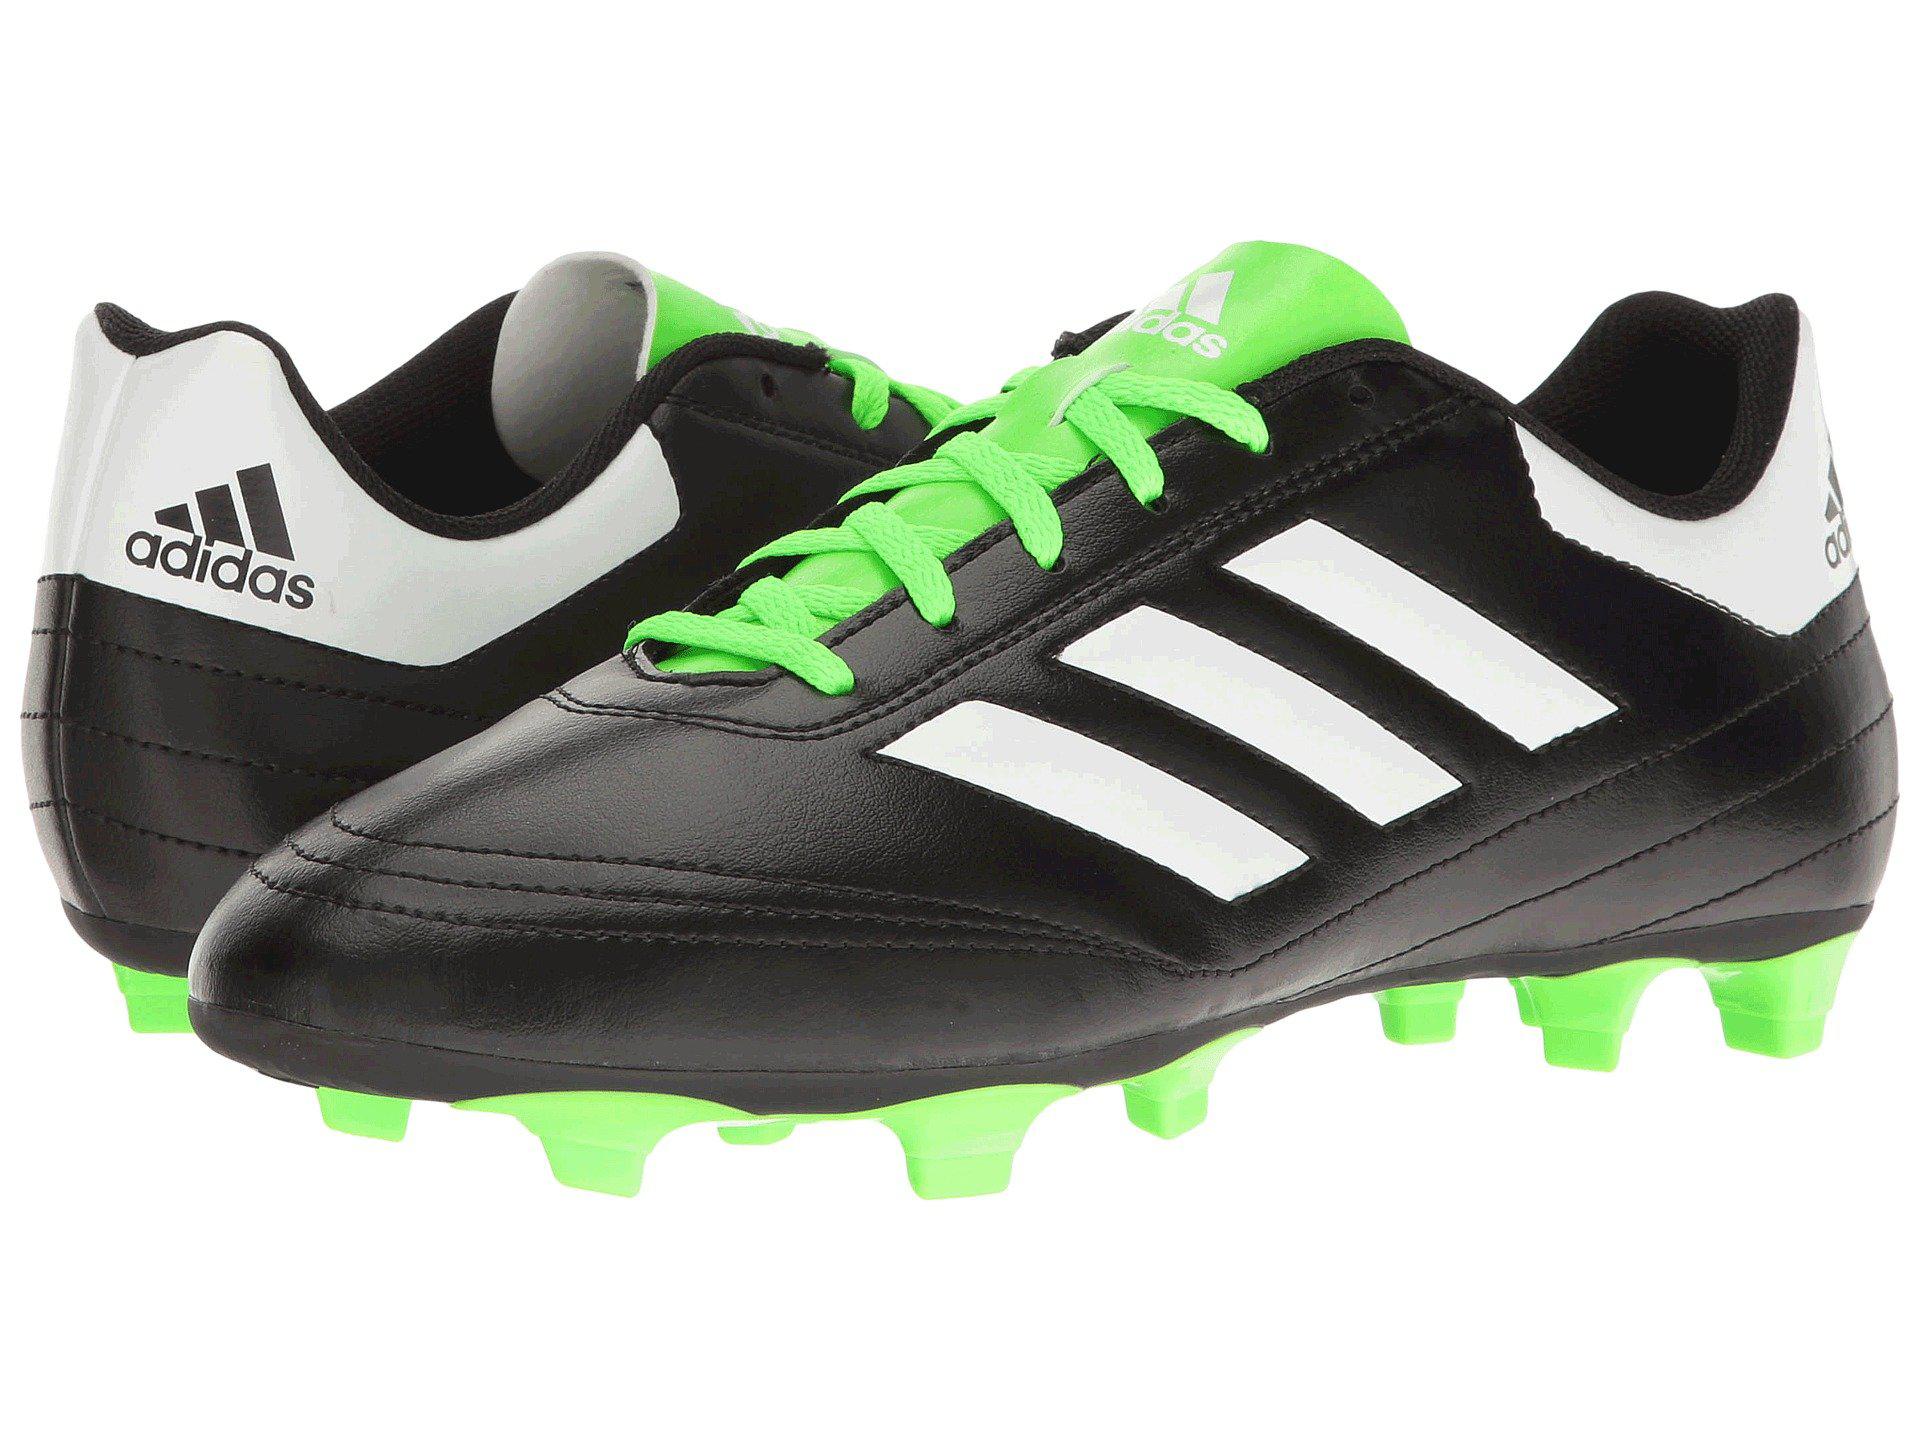 Adidas Synthetic Performance Goletto Vi Fg Soccer Shoe In Green